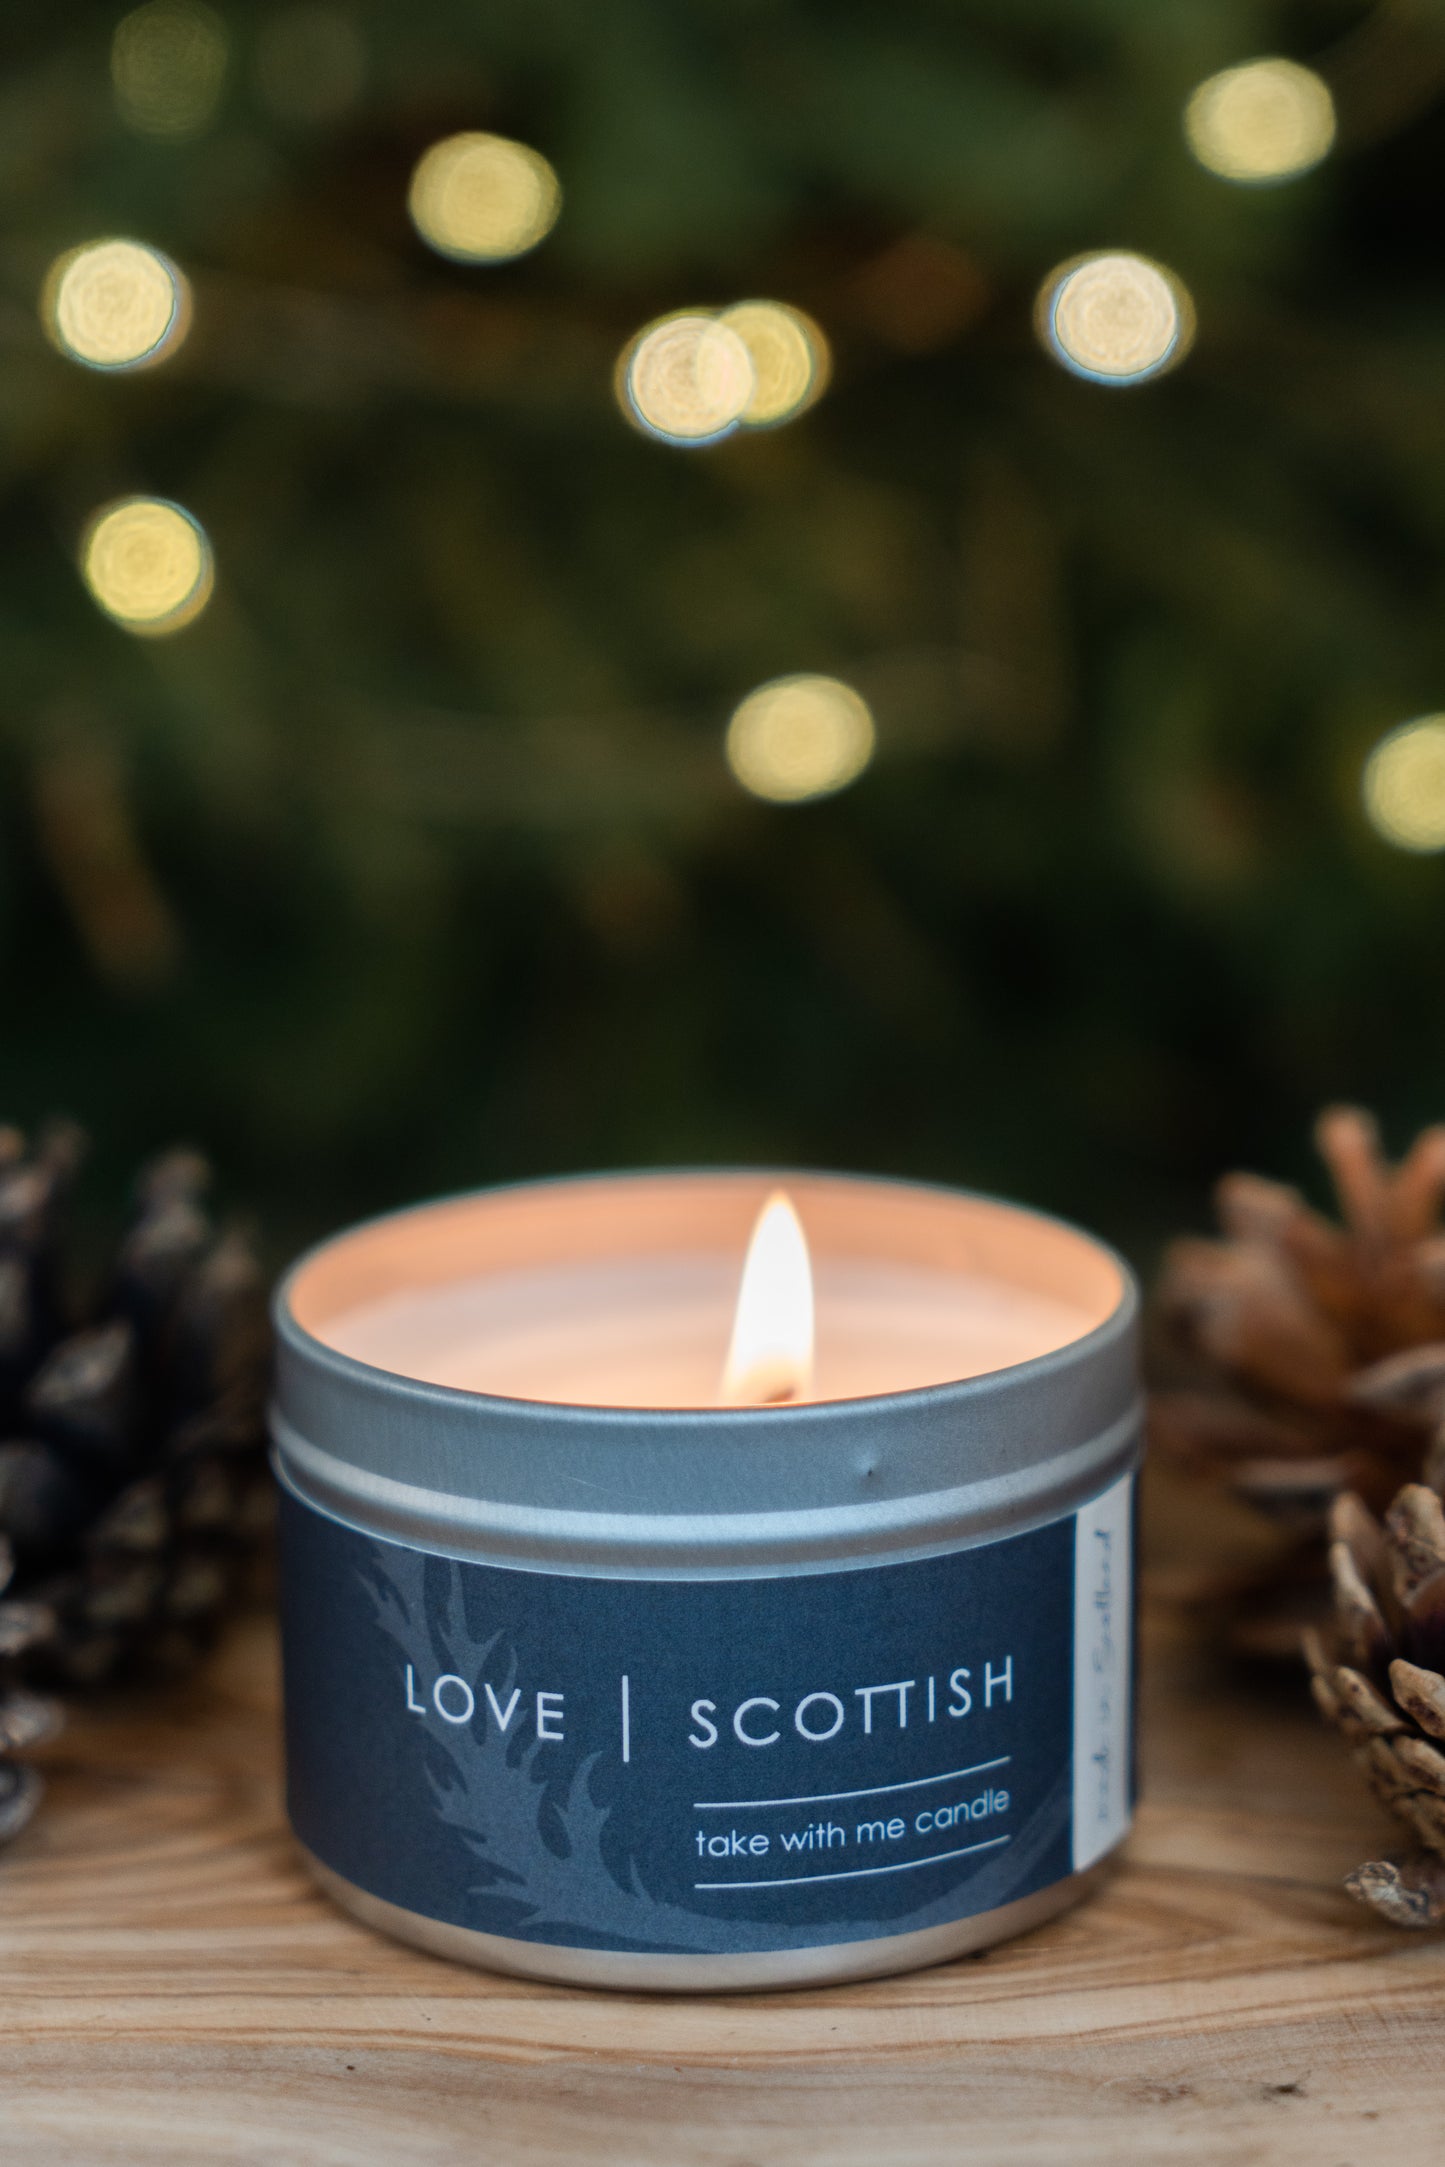 Love Scottish Christmas Tree Travel Tin Candle. Made in Scotland